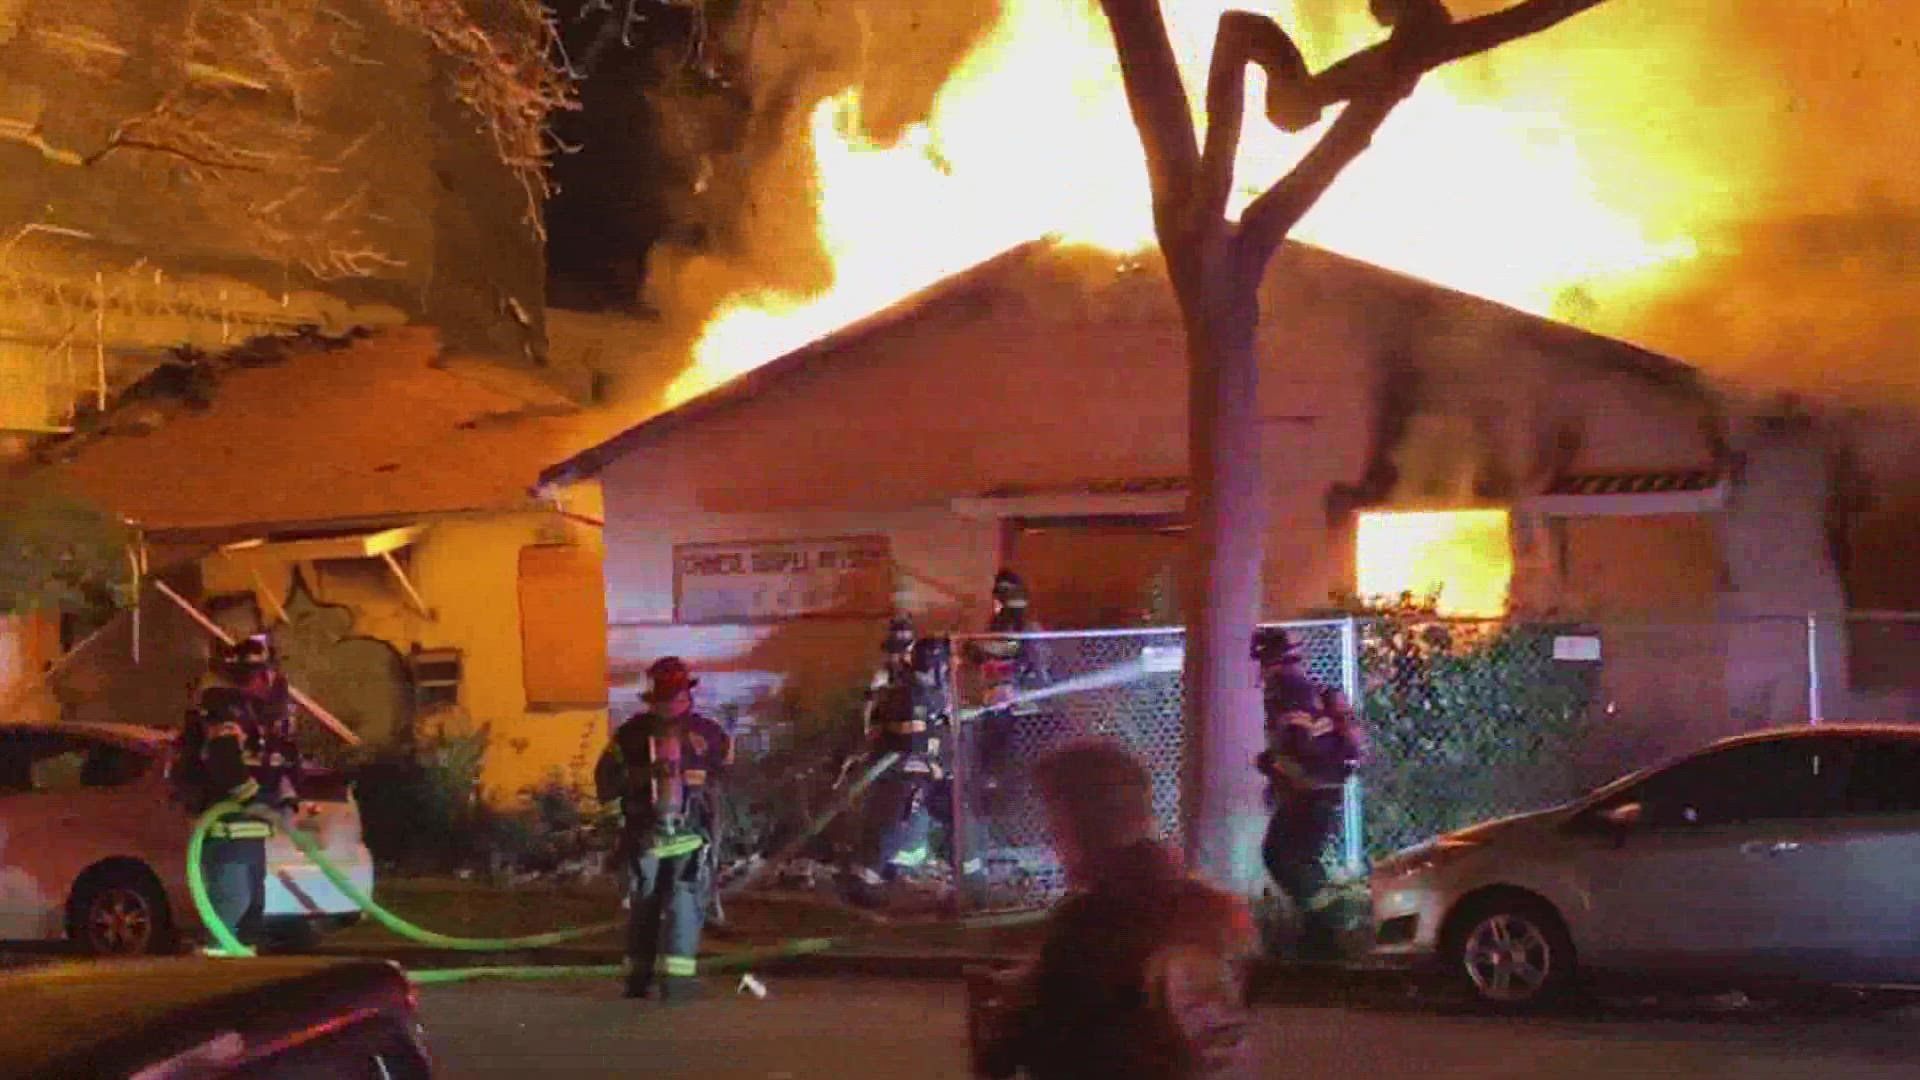 The vacant Chinese Gospel Mission building caught fire on 15th and S streets and has since been knocked down, according to the Sacramento Fire Department.